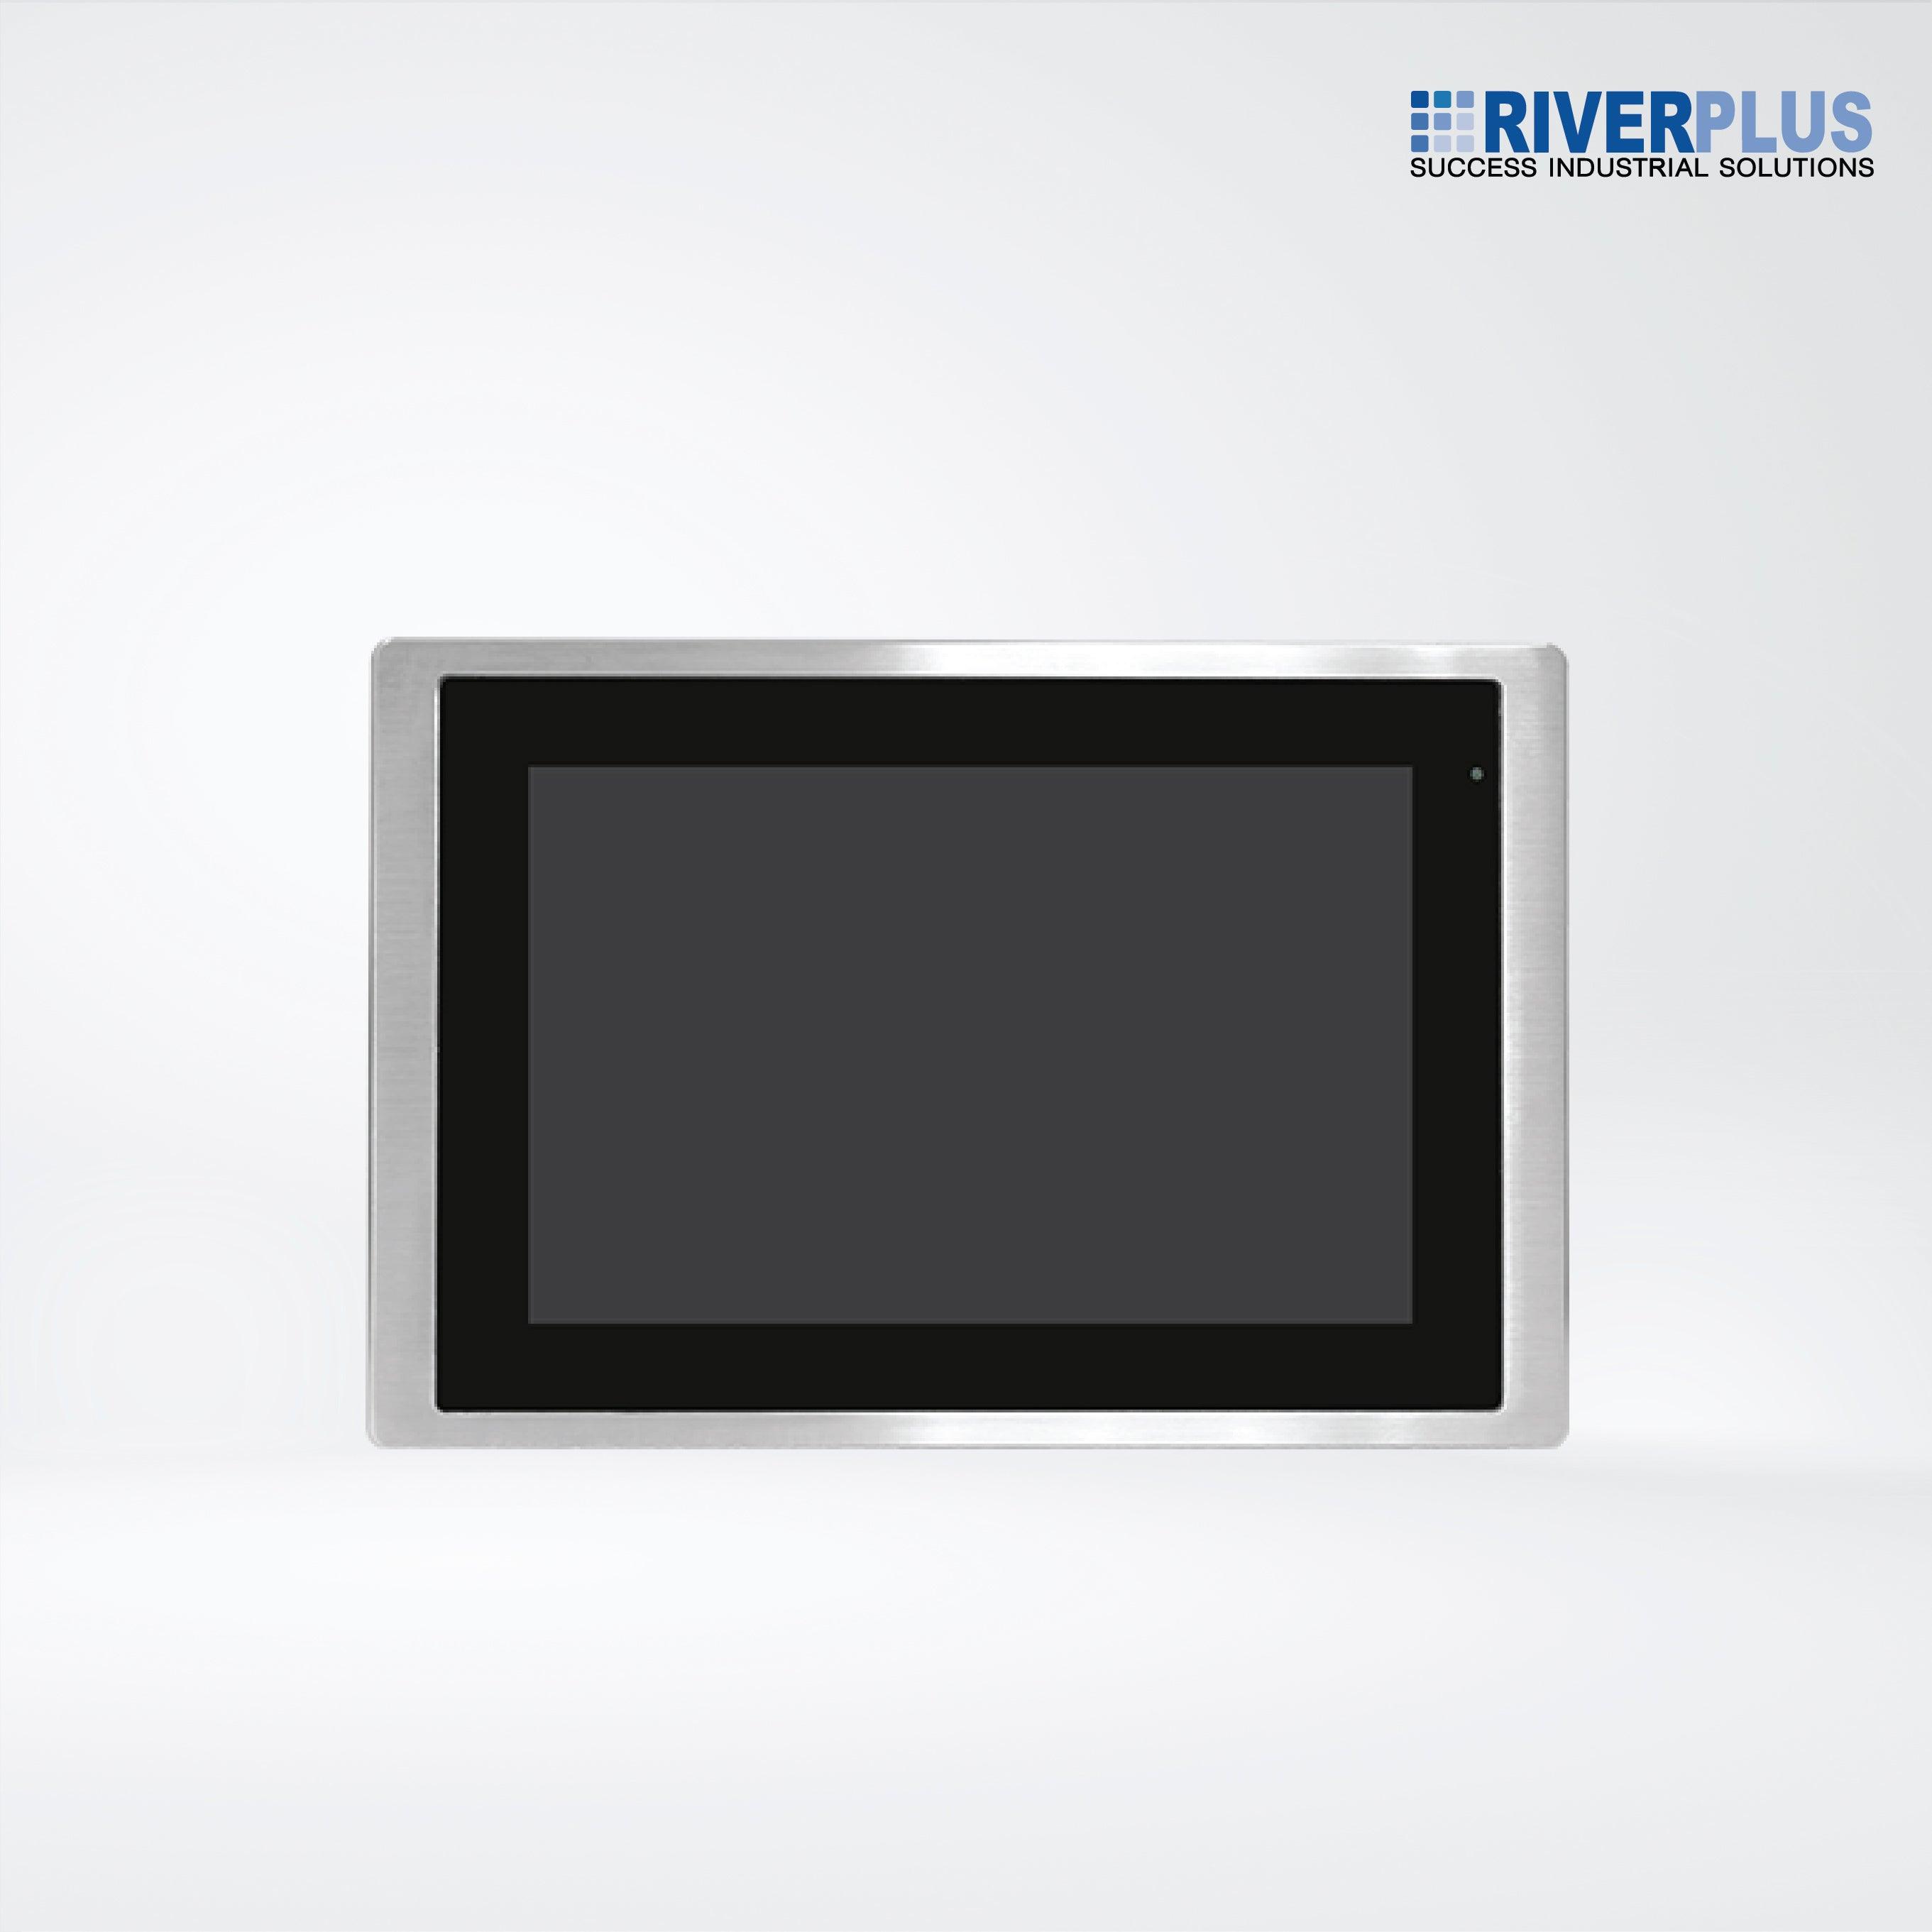 FABS-110PH 10.1” Flat Front Panel IP66 Stainless Chassis Display - Riverplus